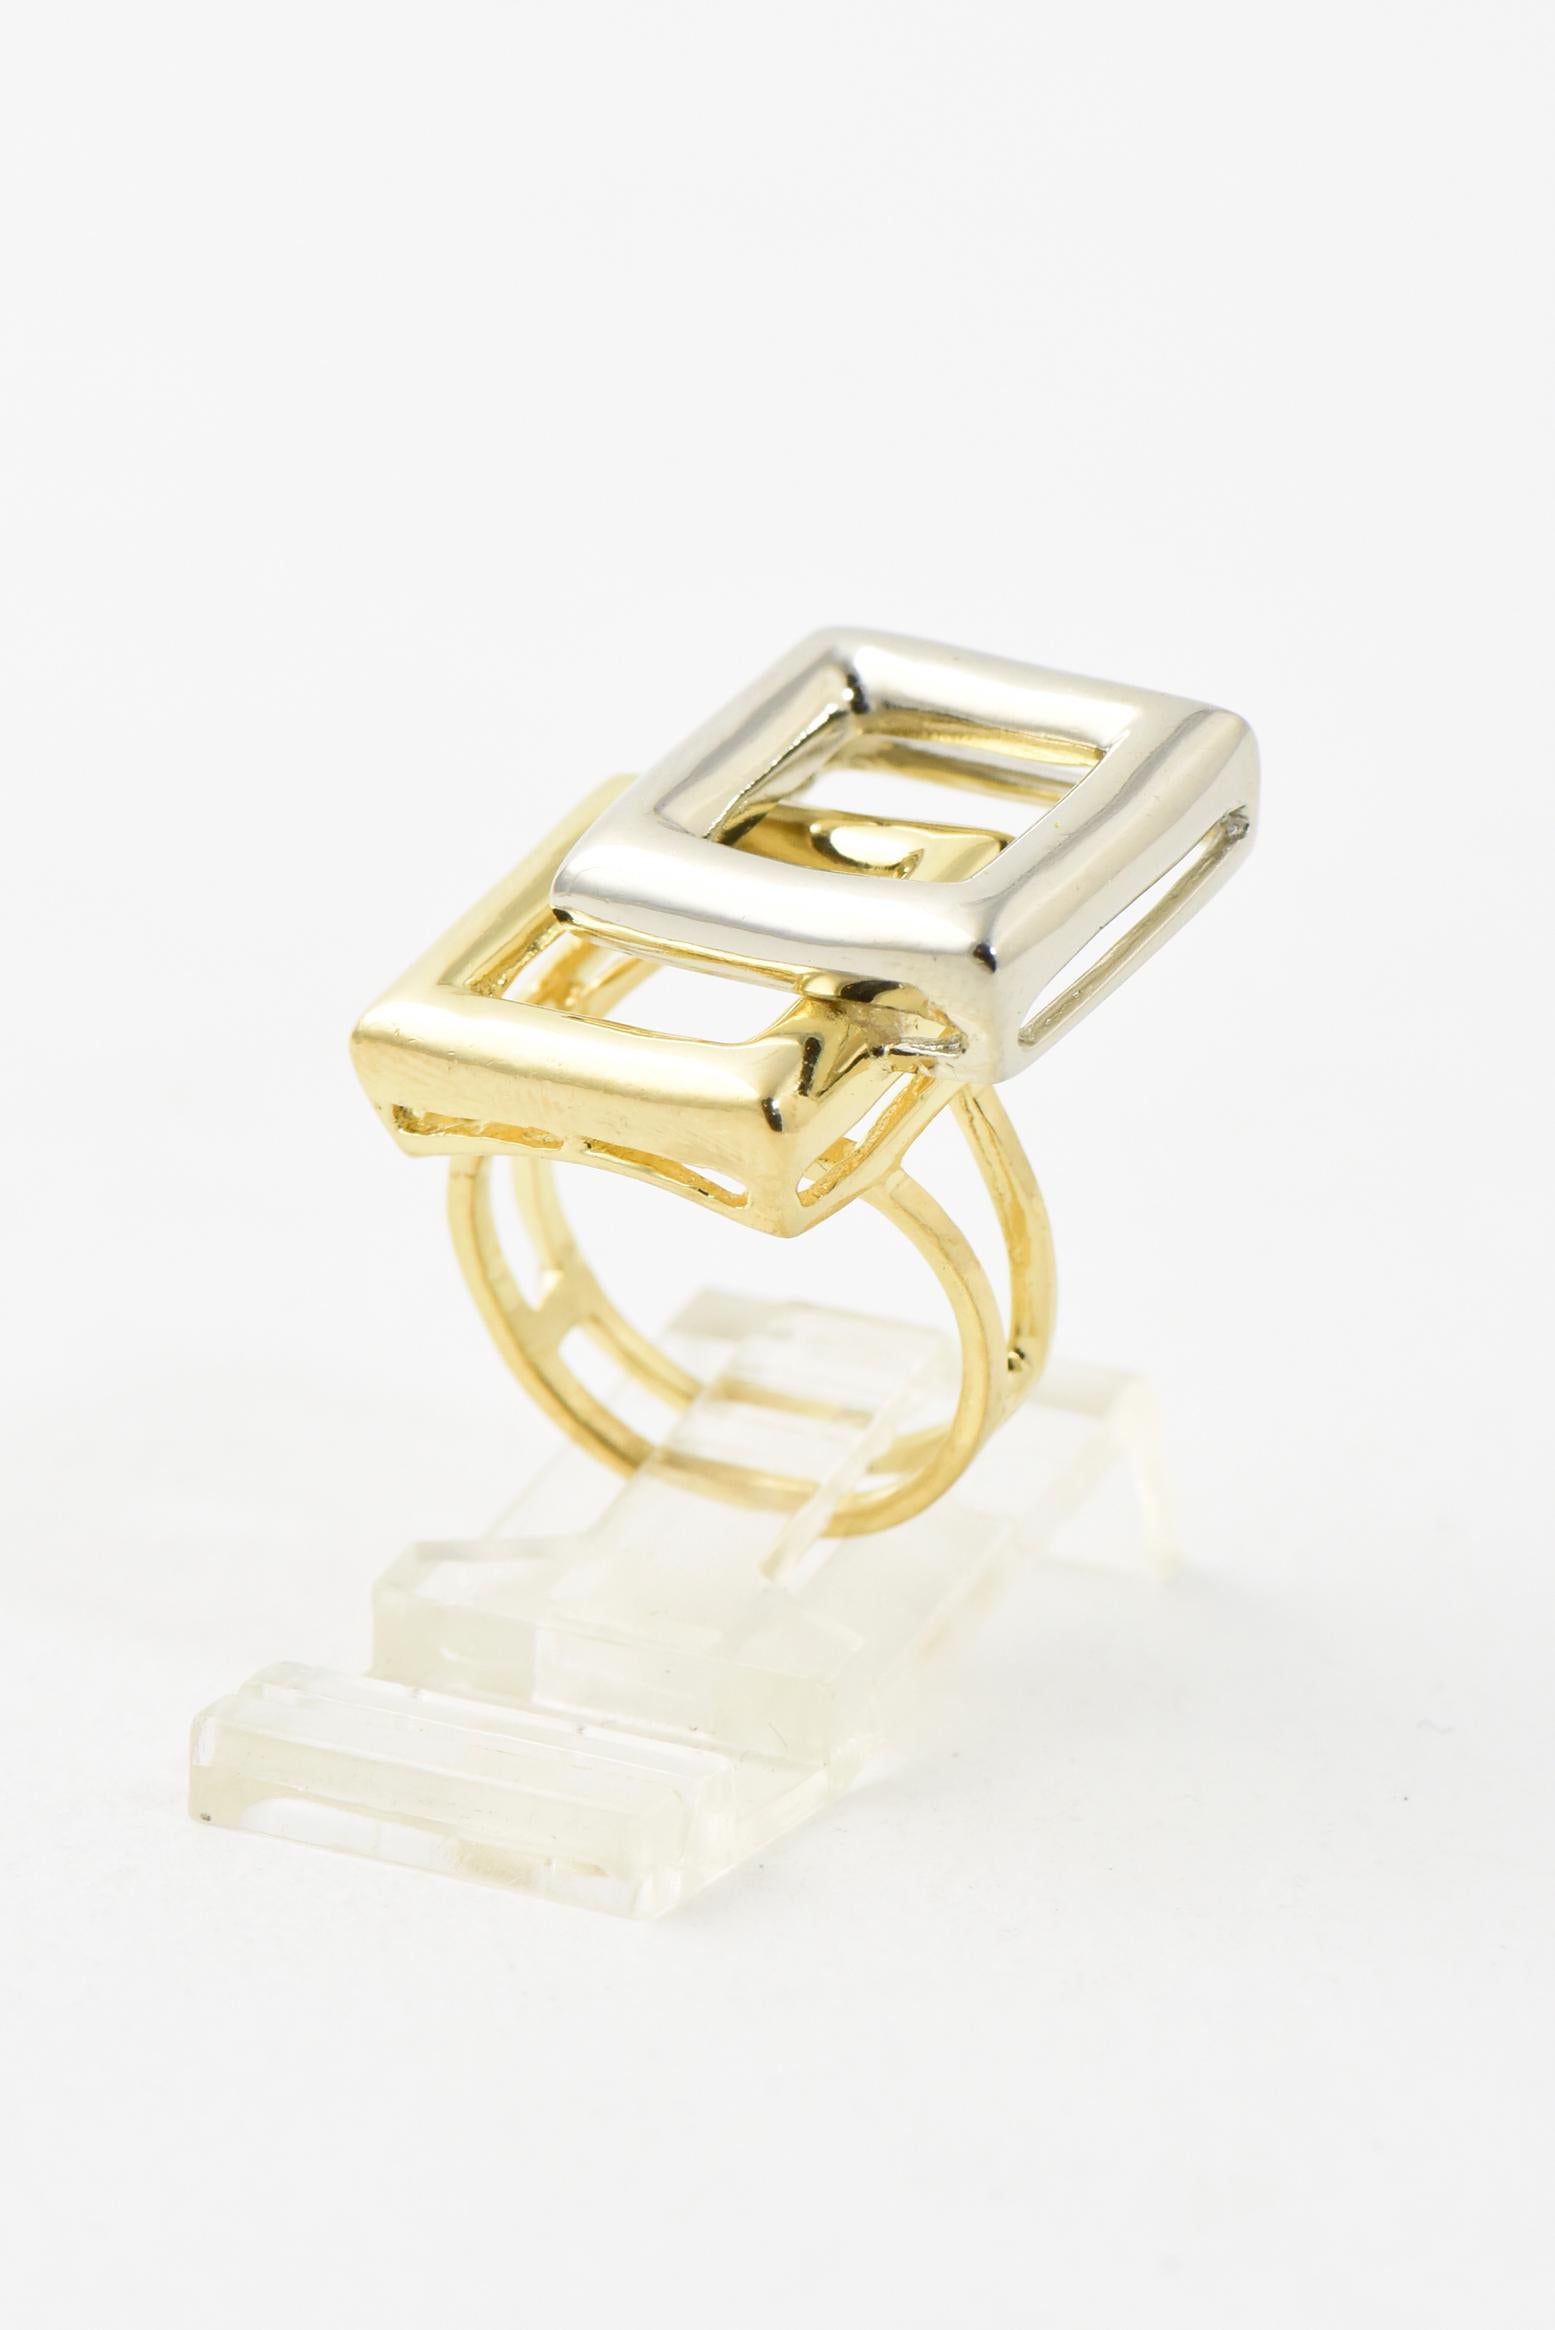 Geometric 18k Gold featuring layered 18k white gold & yellow gold squares. Just polished professionally - looks like new. US size 5.25 - can easily be sized.
